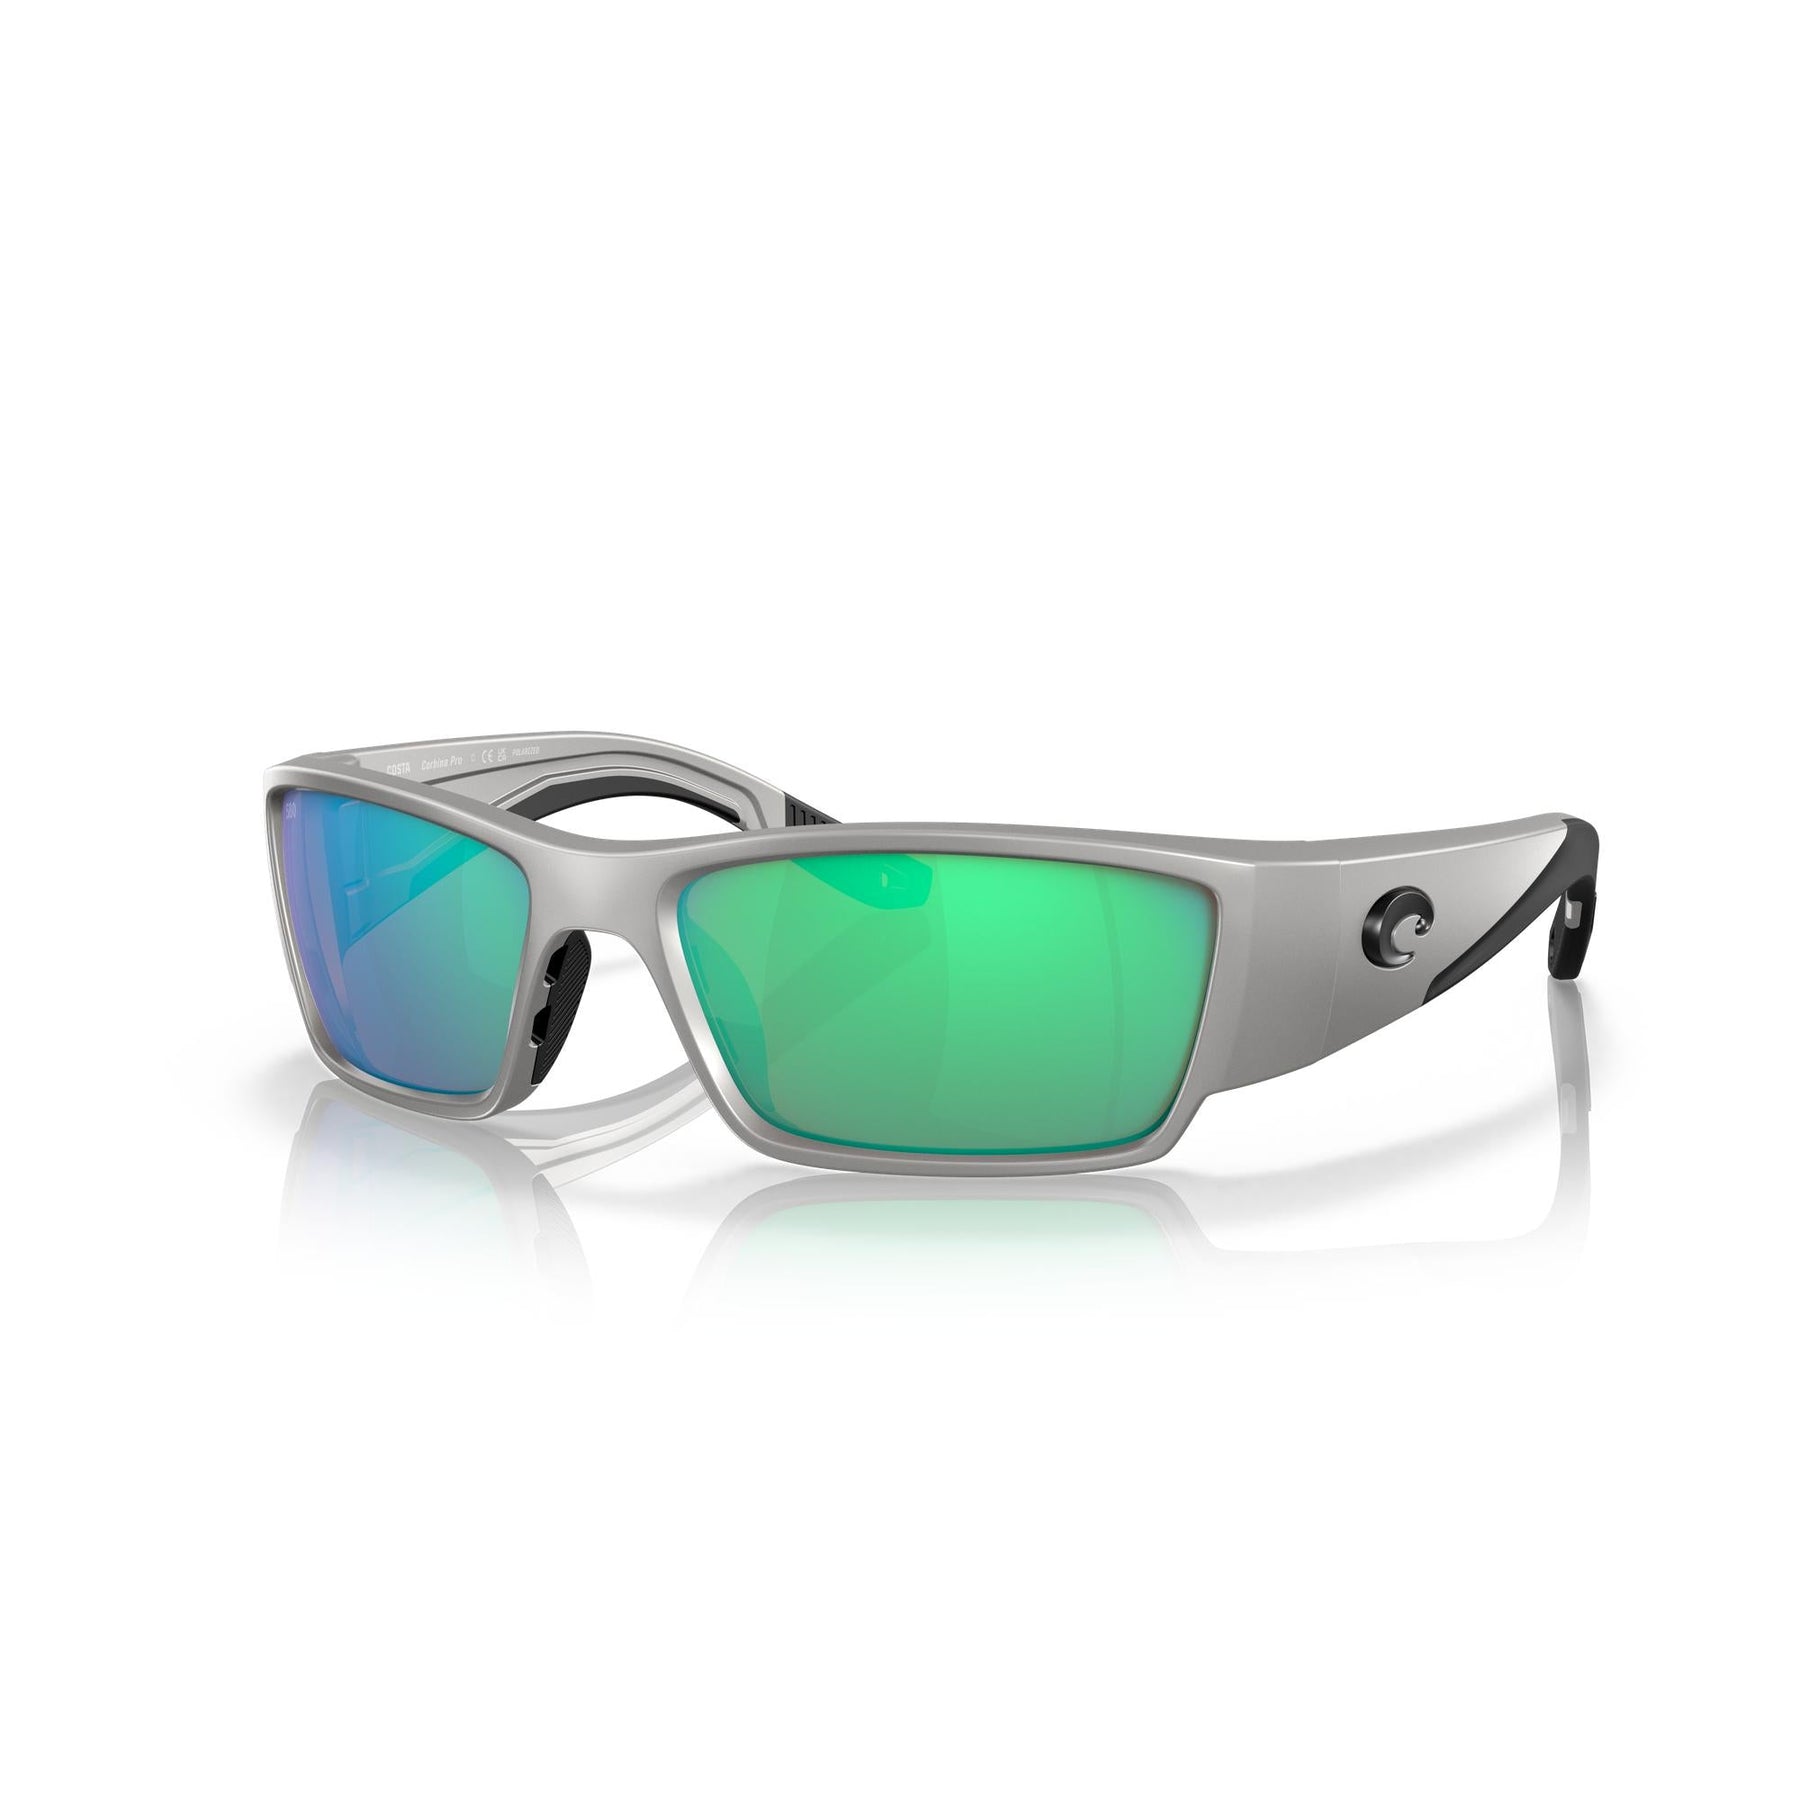 View of Sunglasses Costa Corbina Pro Silver Metallic Green Mirror 580G available at EZOKO Pike and Musky Shop